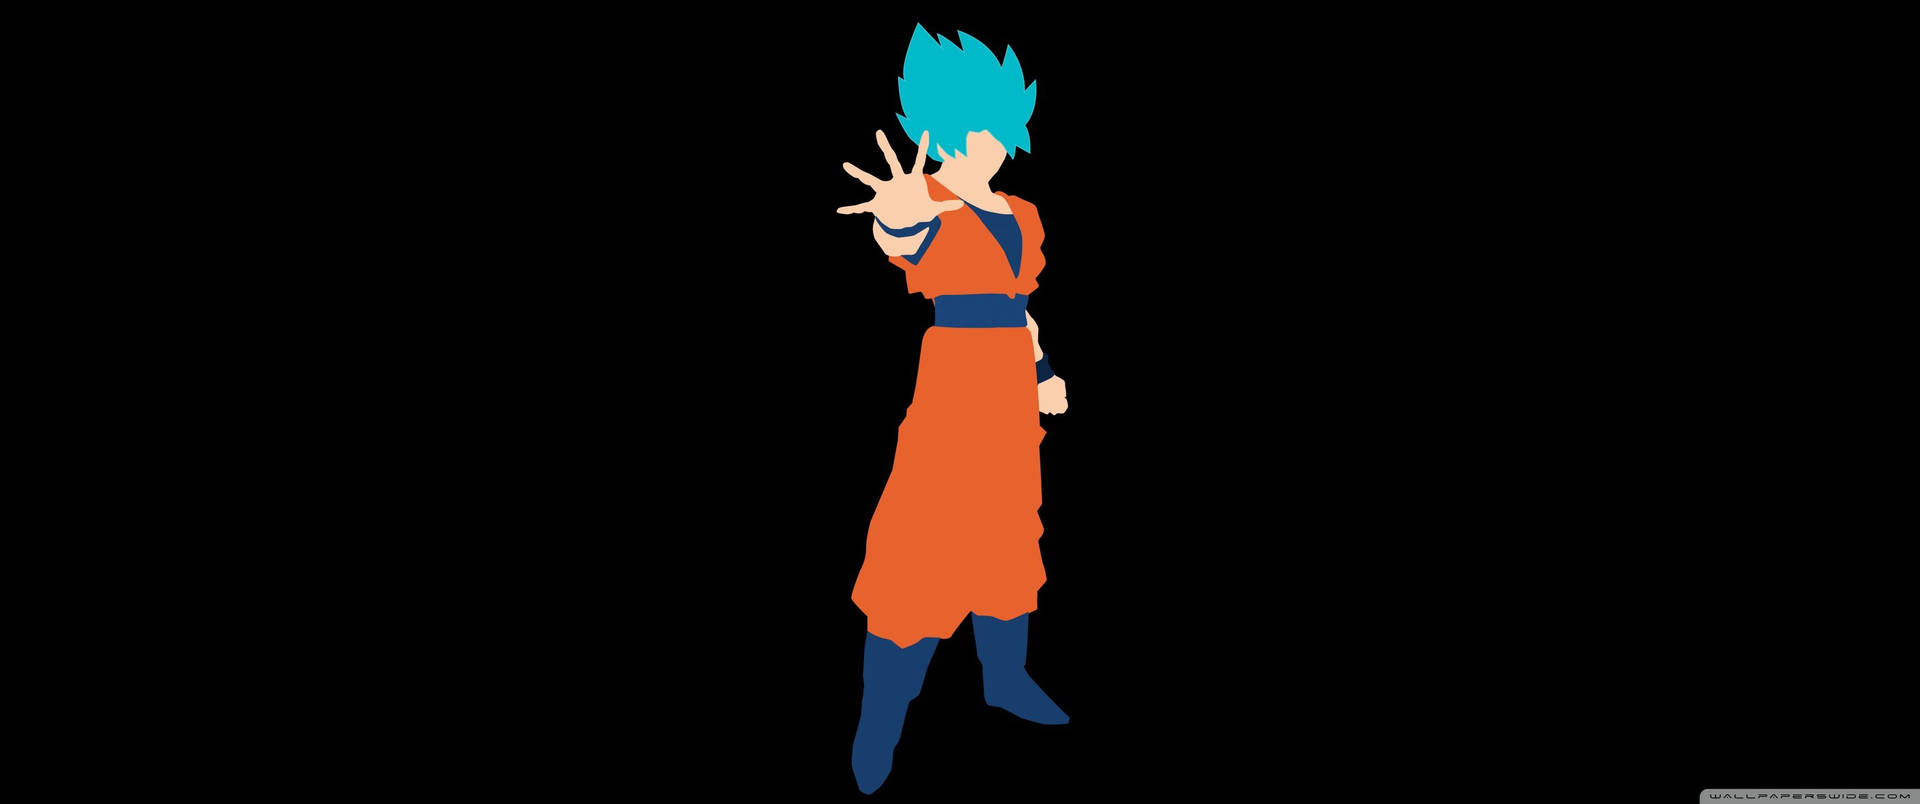 A Powerfully Charged Goku in His Super Saiyan Blue Form Wallpaper